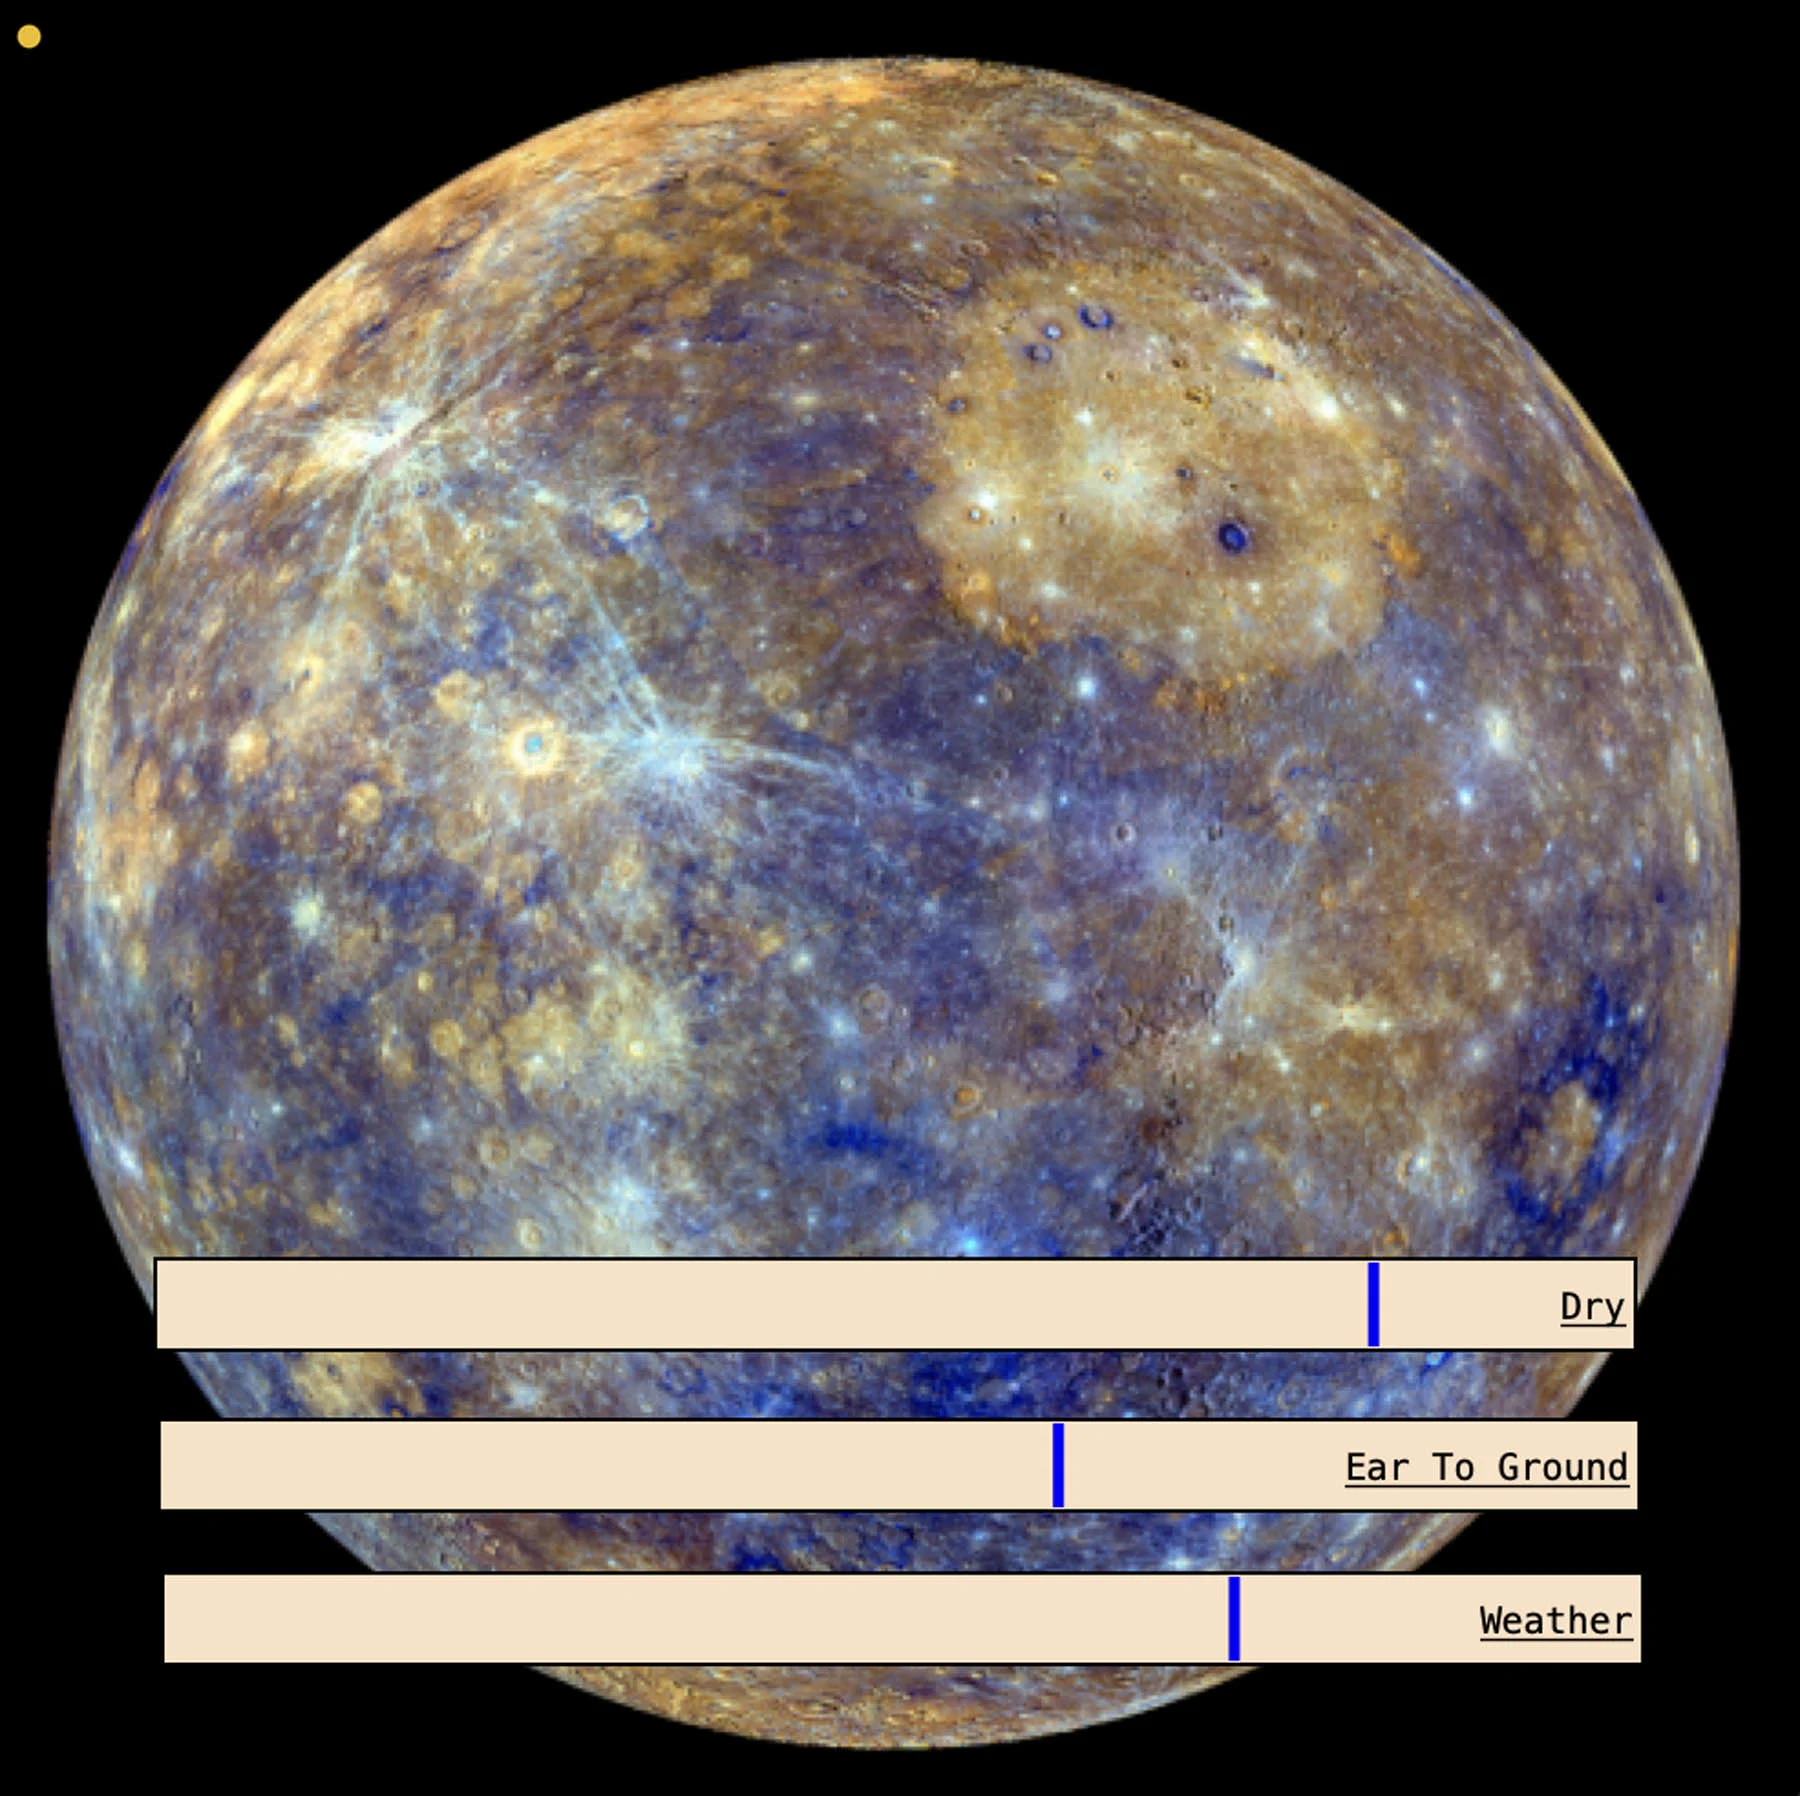 A screenshot of the Mercury VST plug-in. The plug-in is made up of a photo of Mercury. There are three long, beige rectangles overlaid in the bottom third of the photograph, with a phrase in each one: Dry, Ear To Ground, Weather.